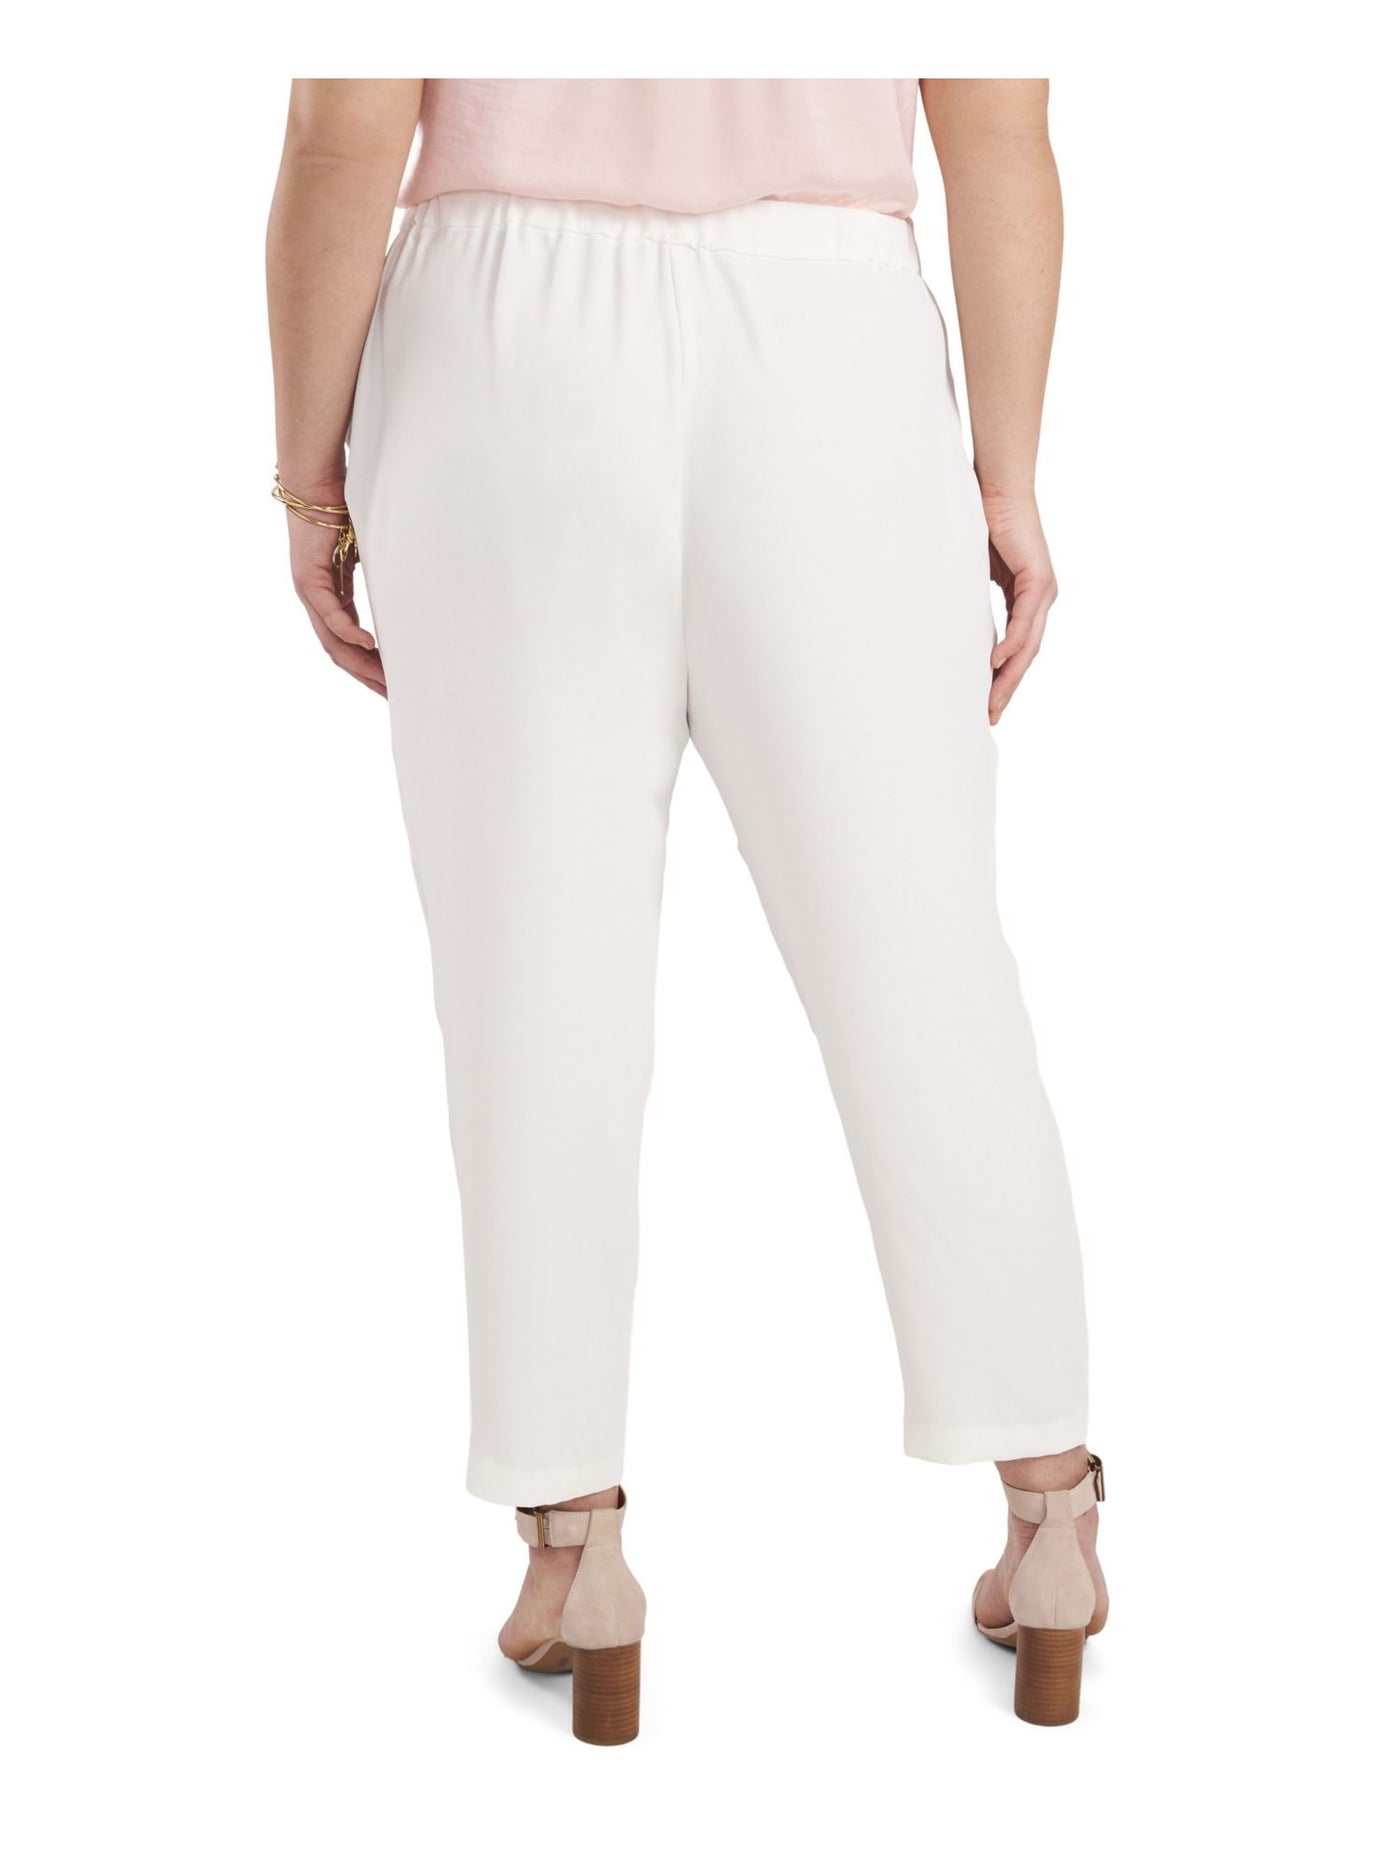 VINCE CAMUTO Womens White Stretch Pocketed Pull On Wear To Work Straight leg Pants Plus 3X